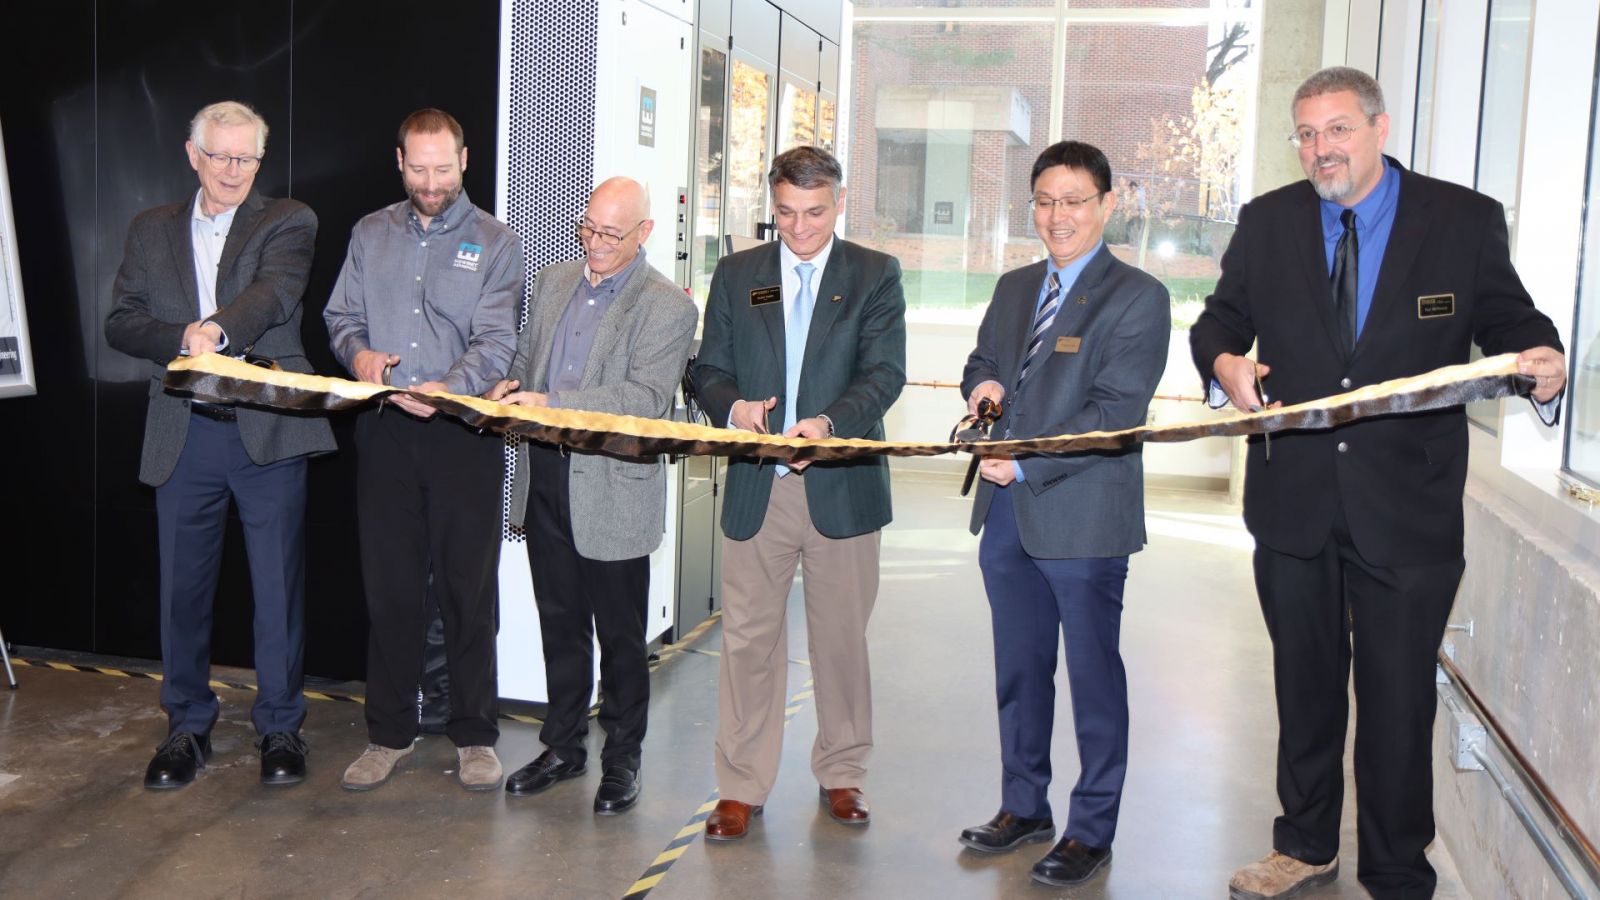 Representatives from Howmet and Zeiss joined Purdue for the ScanBox ribbon cutting. Purdue members, from left to right, include Ken Burbank, Daniel Castro, Young-Jun Son and Paul McPherson. (Purdue University photo/John O'Malley)